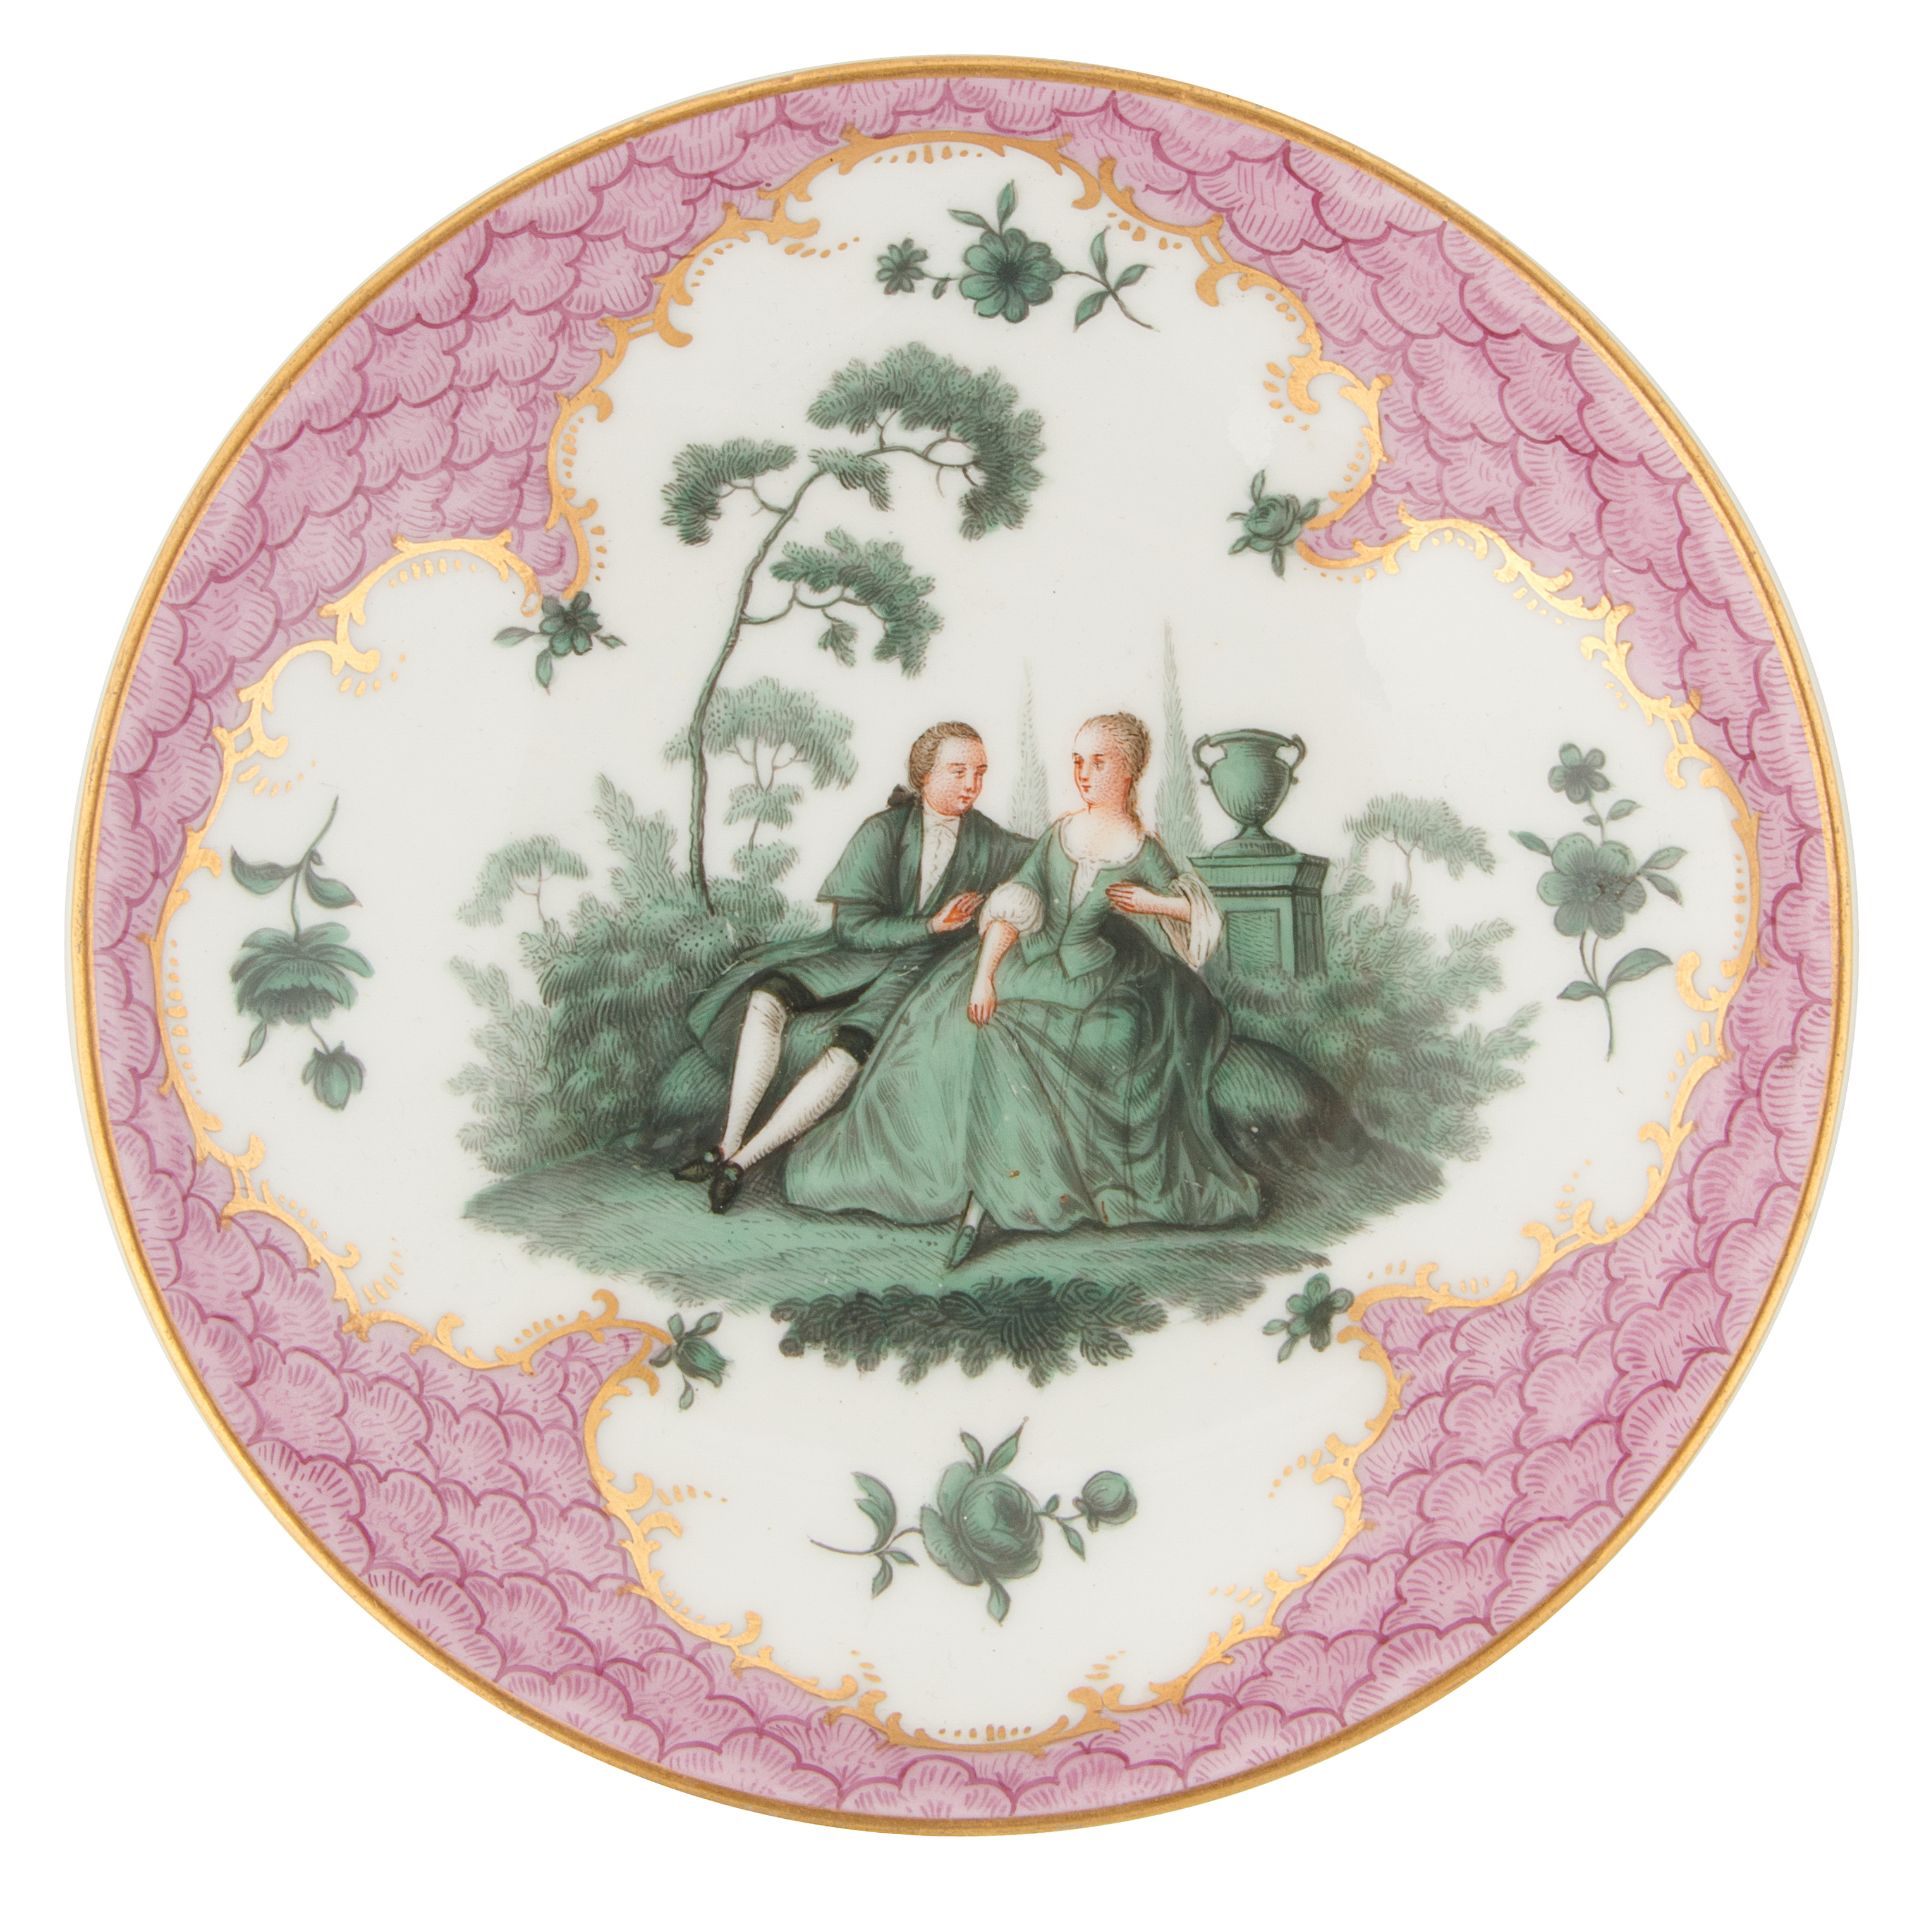 19TH CENTURY MEISSEN PORCELAIN TEA CUP AND SAUCER - Image 5 of 7